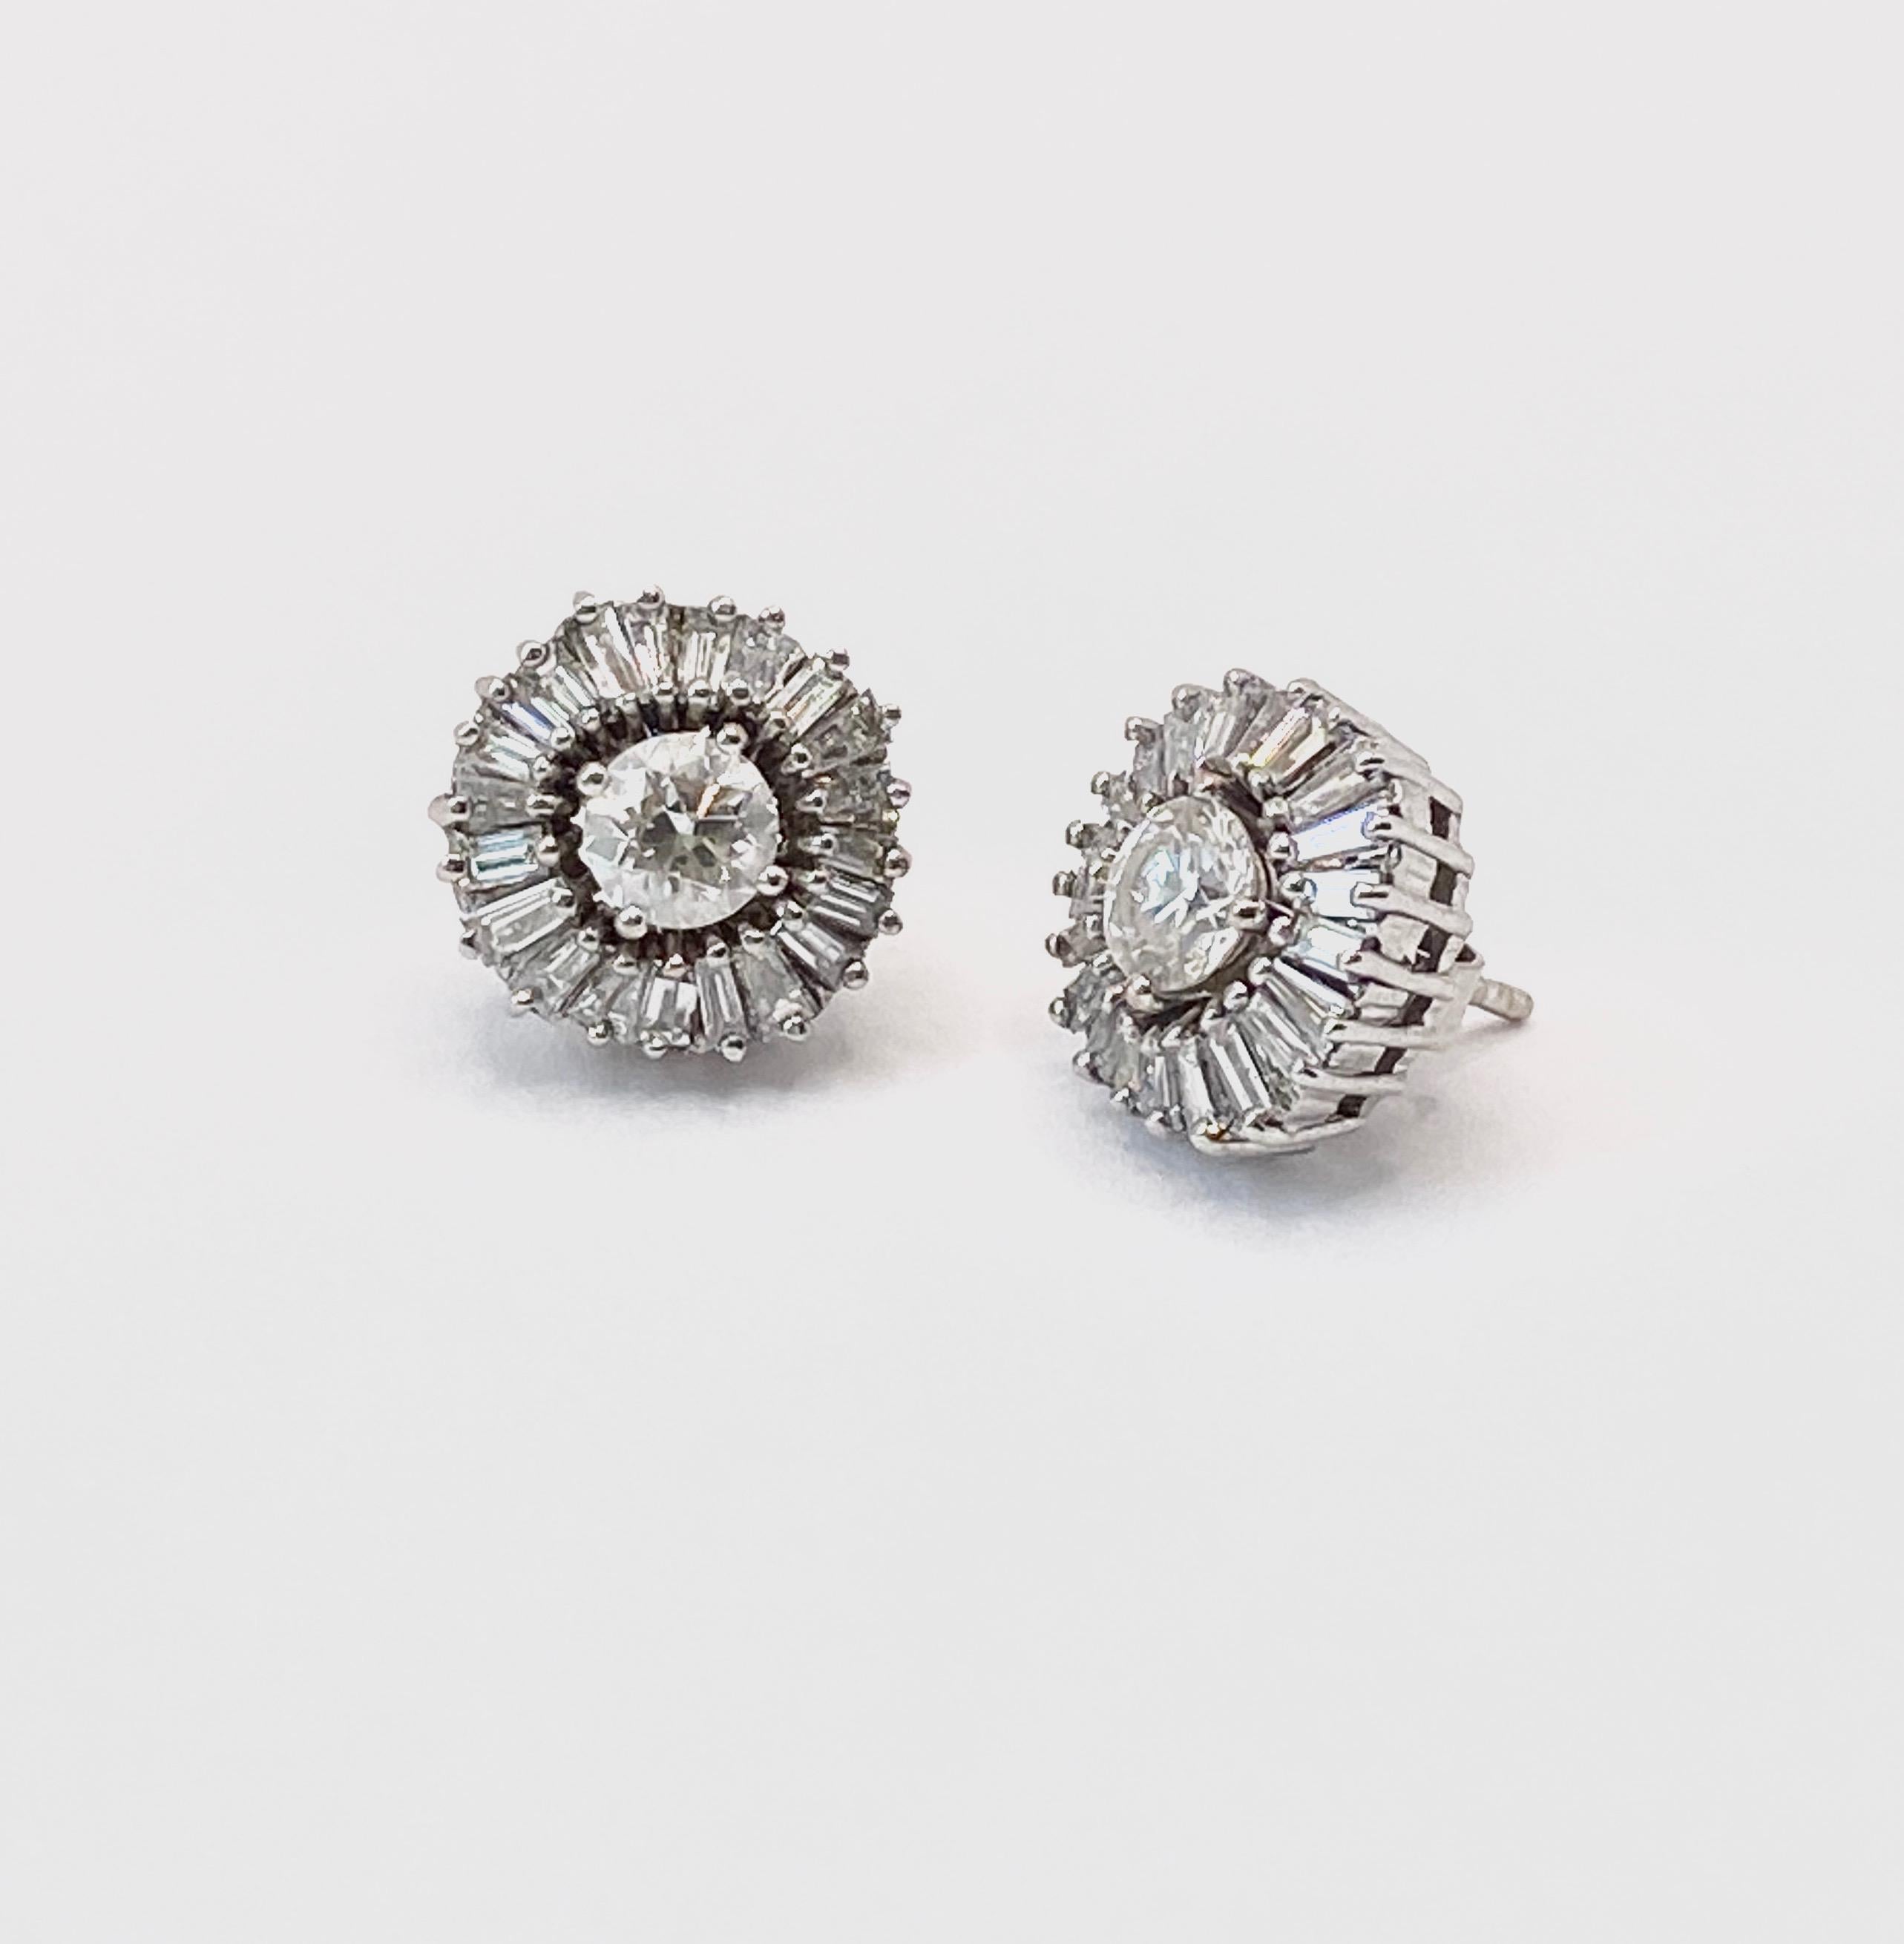 0.70 total carat diamond studs surrounded by tapered baguettes set uneven and creating a one of a kind harmonious piece. Can be created modular or as one piece. 
